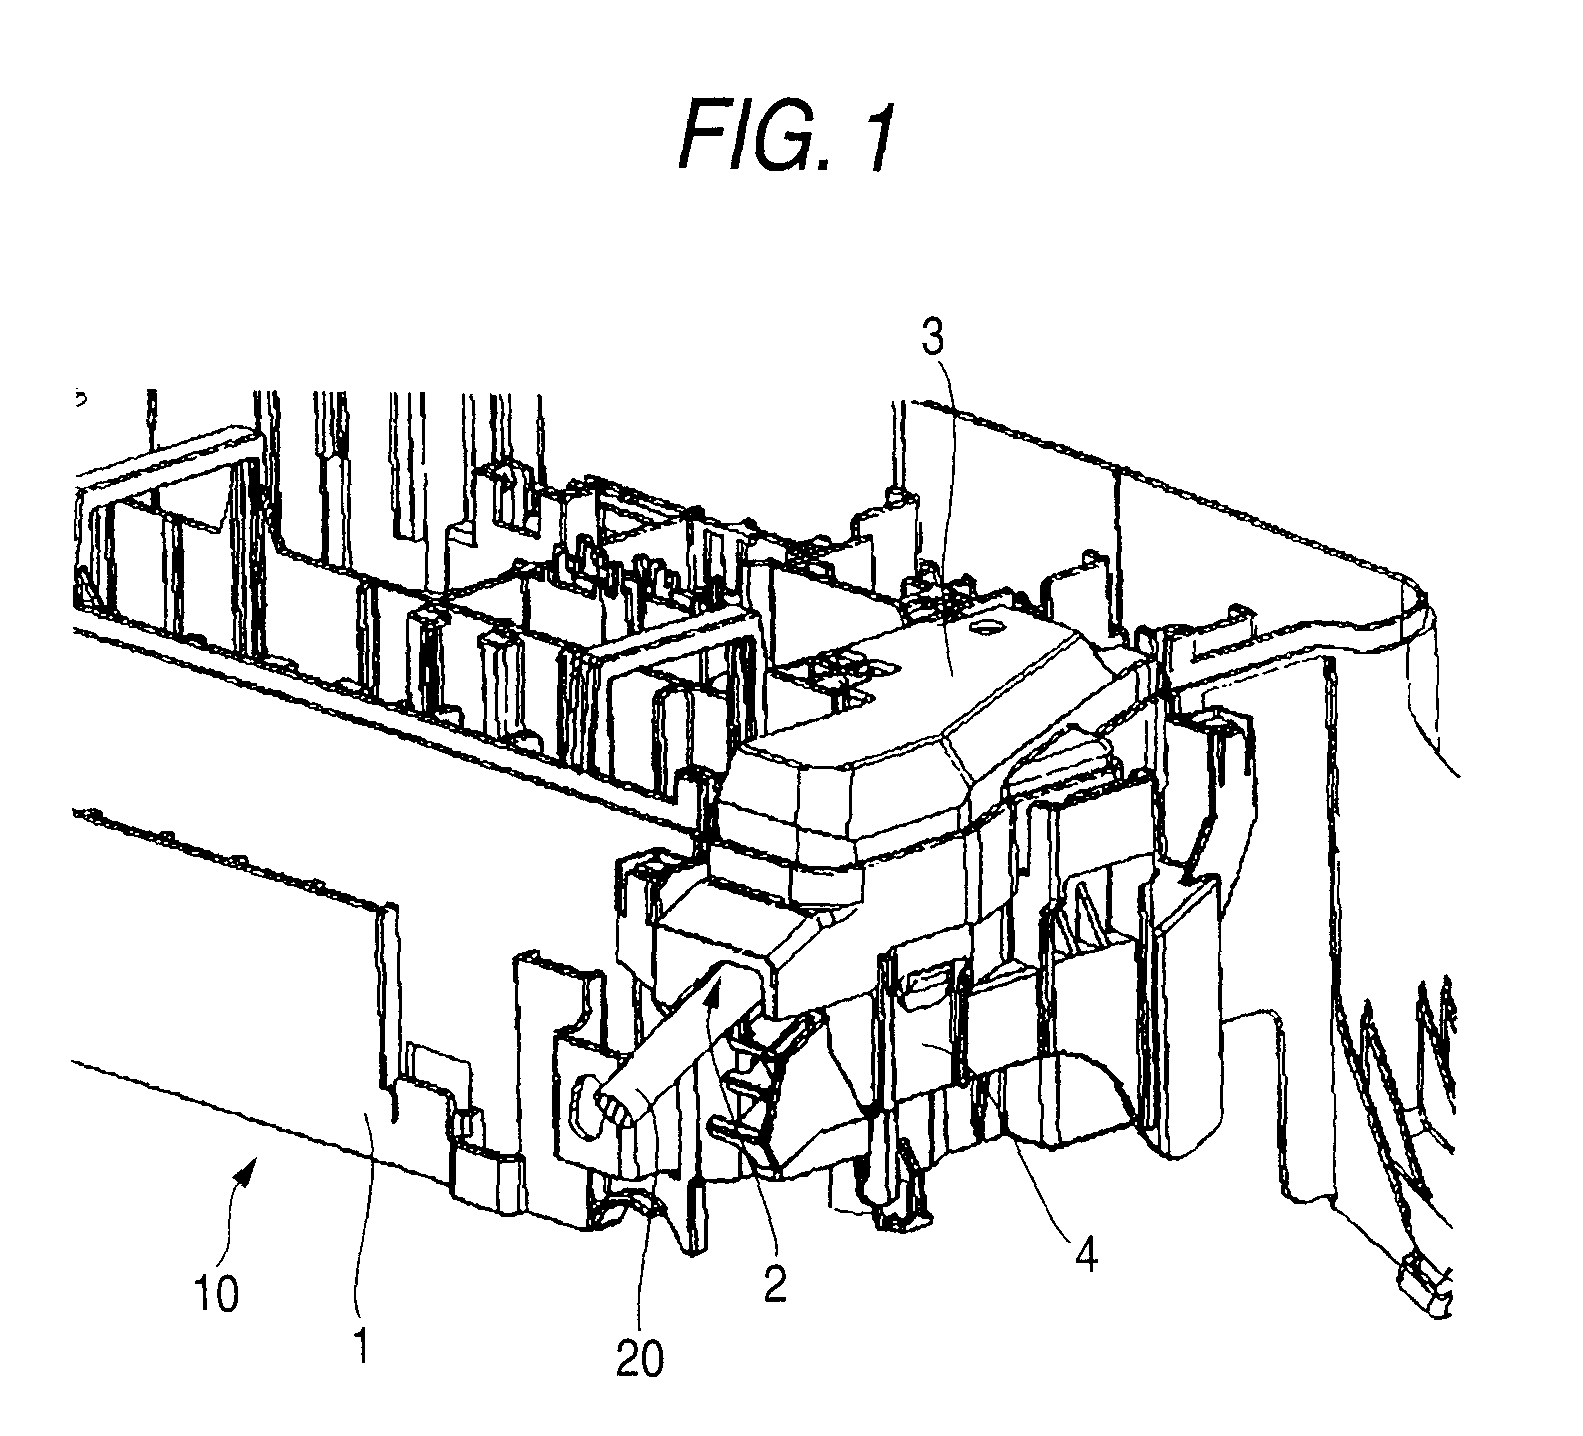 Resin-molded structural body having water-stop structure in wire harness path